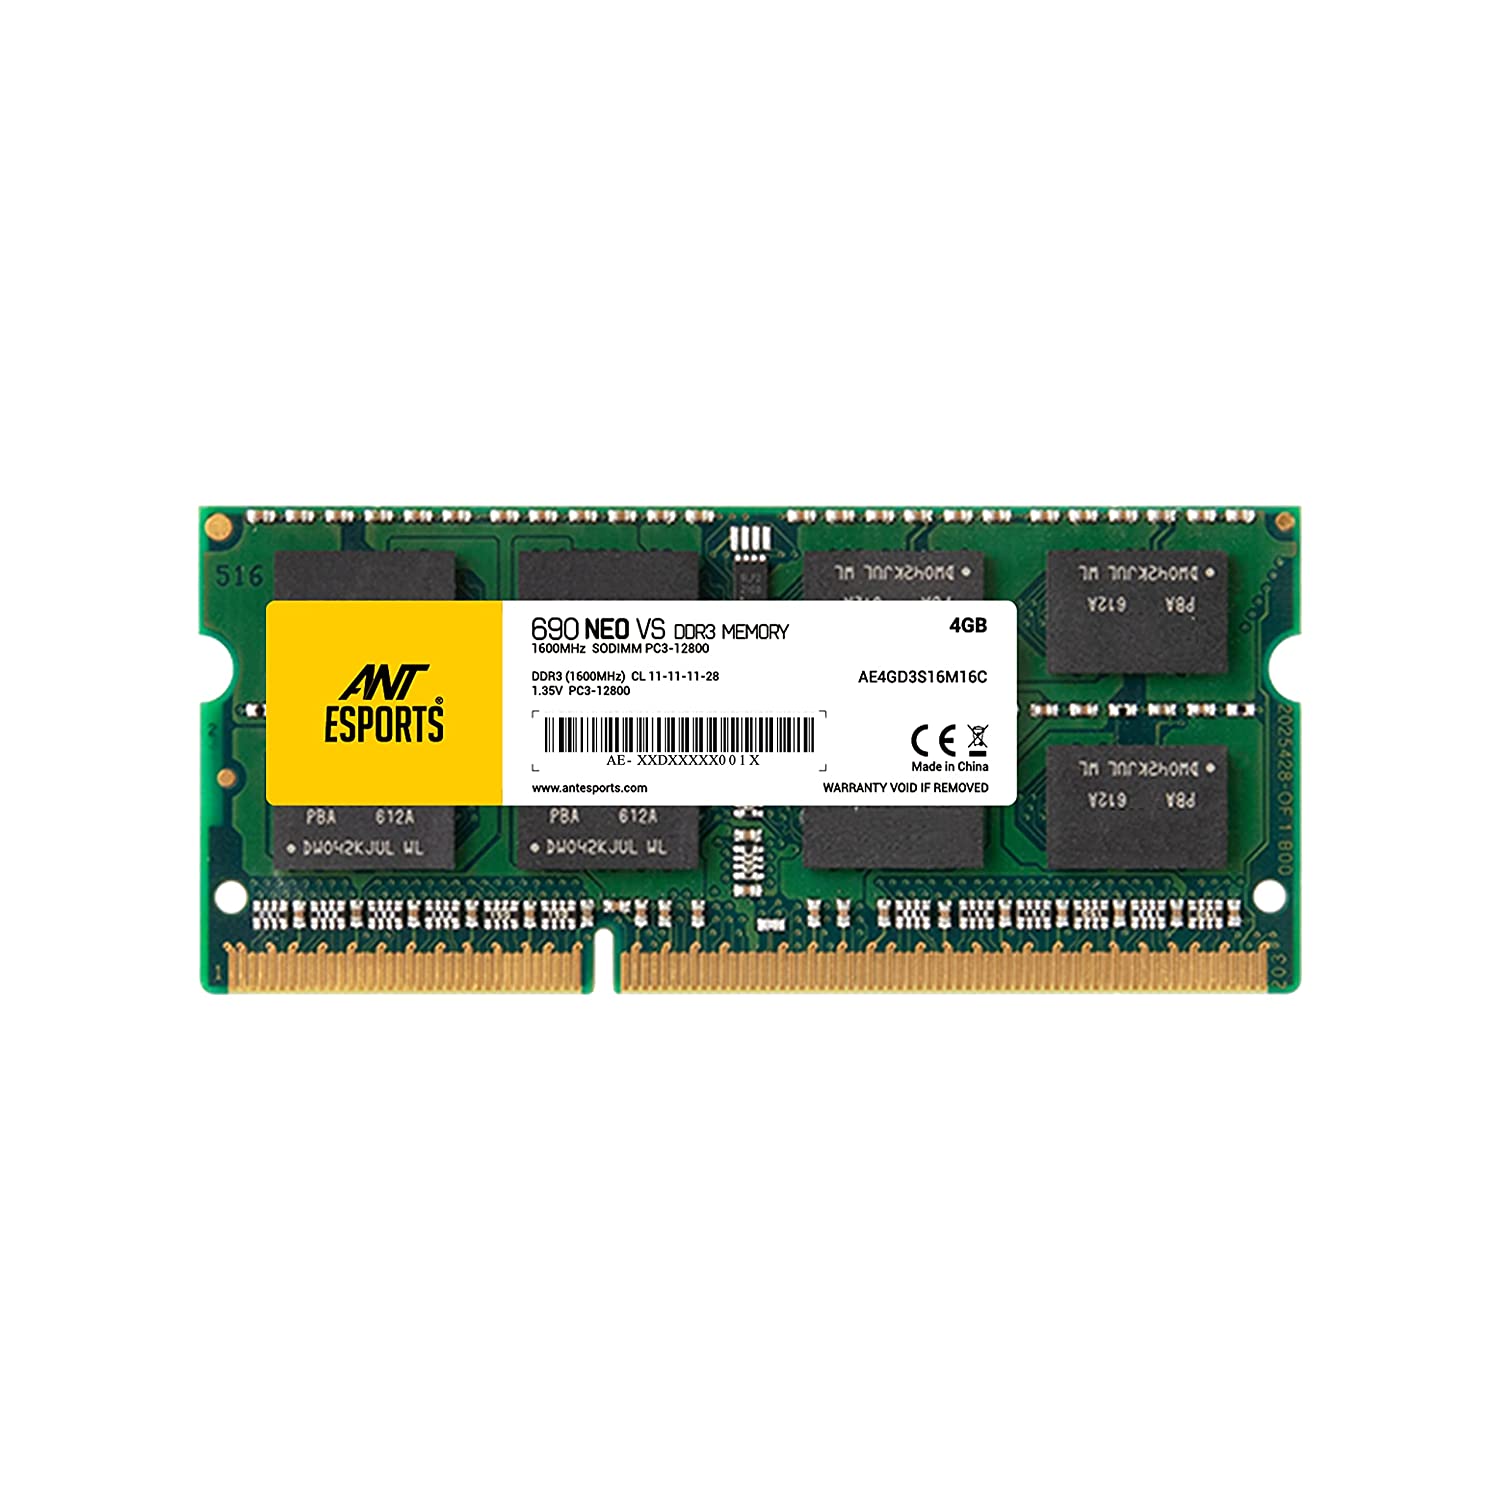 Ant Esports 690 NEO VS 4GB (1*4GB) DDR3 1600 MHz CL 11-11-11-28 SO-DIMM Laptop Memory - AE4GD3S16M16C-Laptop Memory-dealsplant